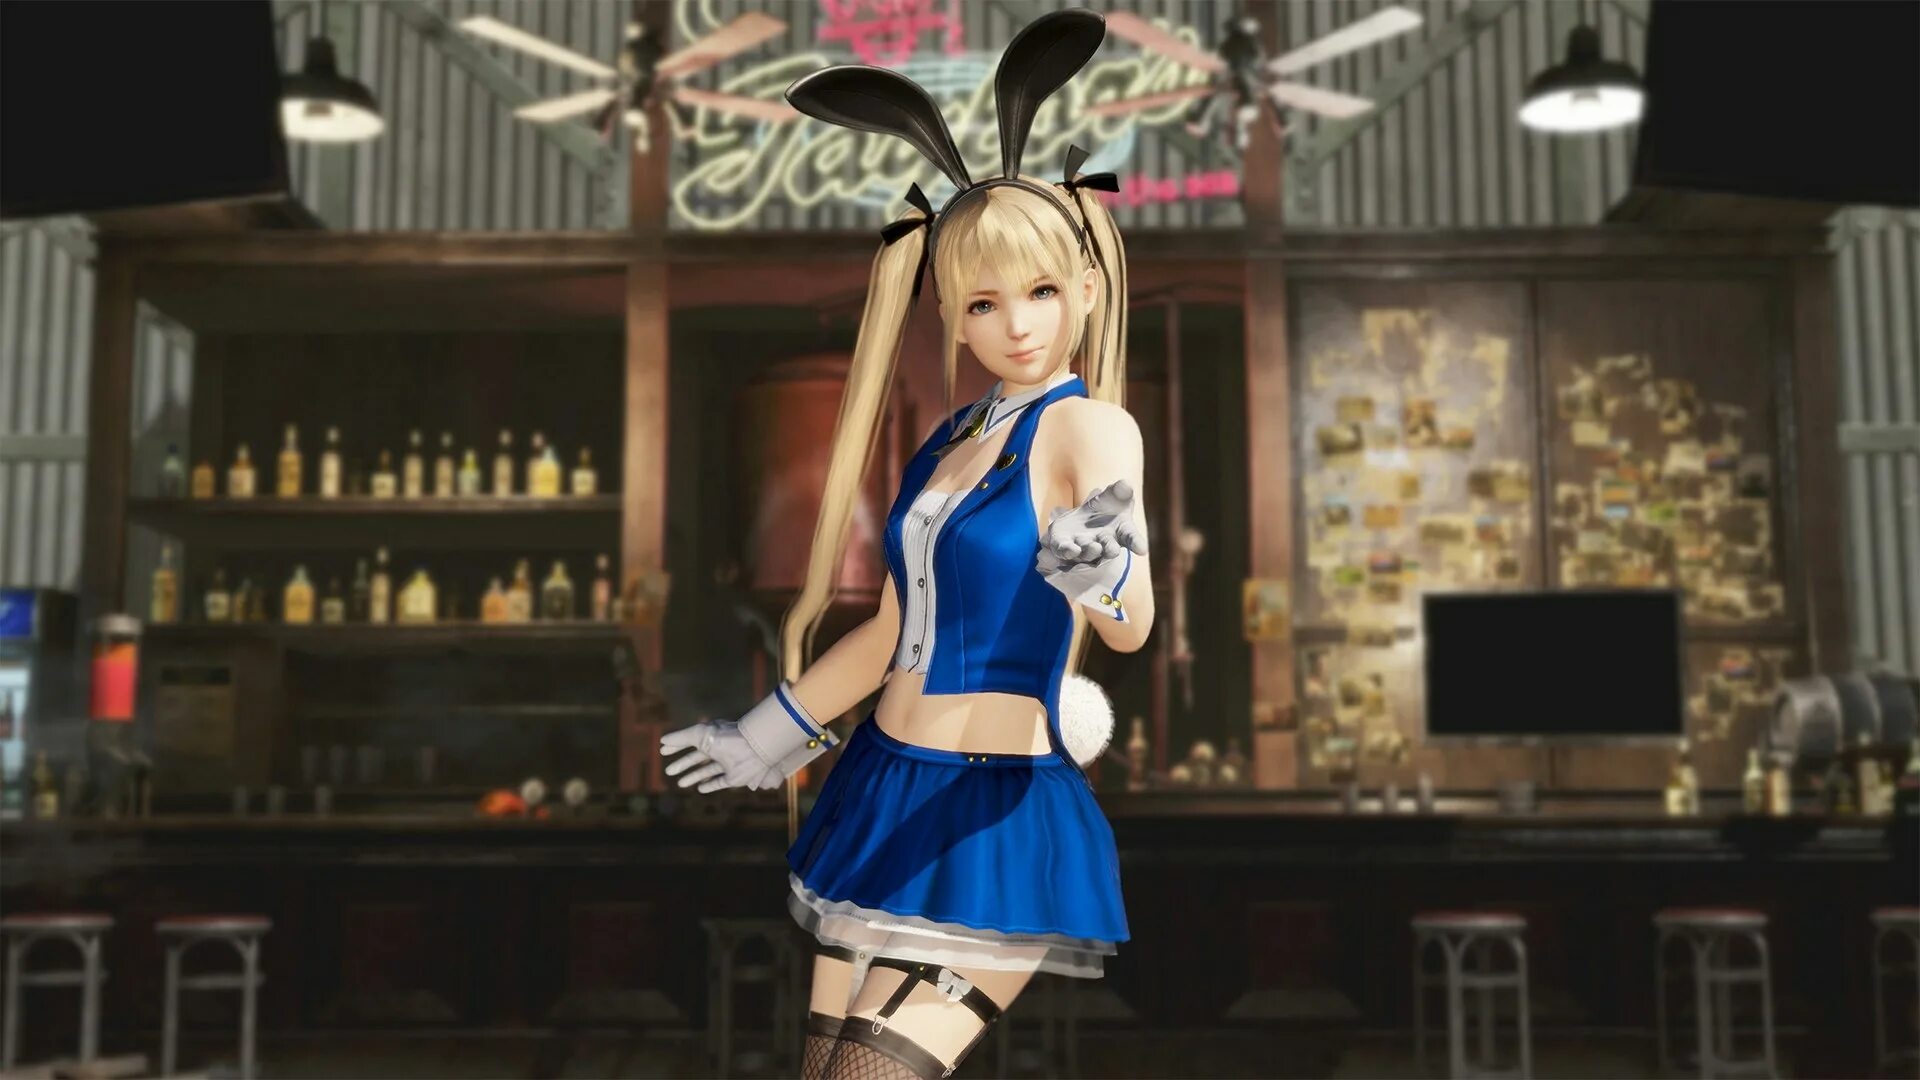 Dead or Alive 6 Мари. Dead or Alive 6 Marie Rose. Dead or Alive Marie Rose. 3d cosplay